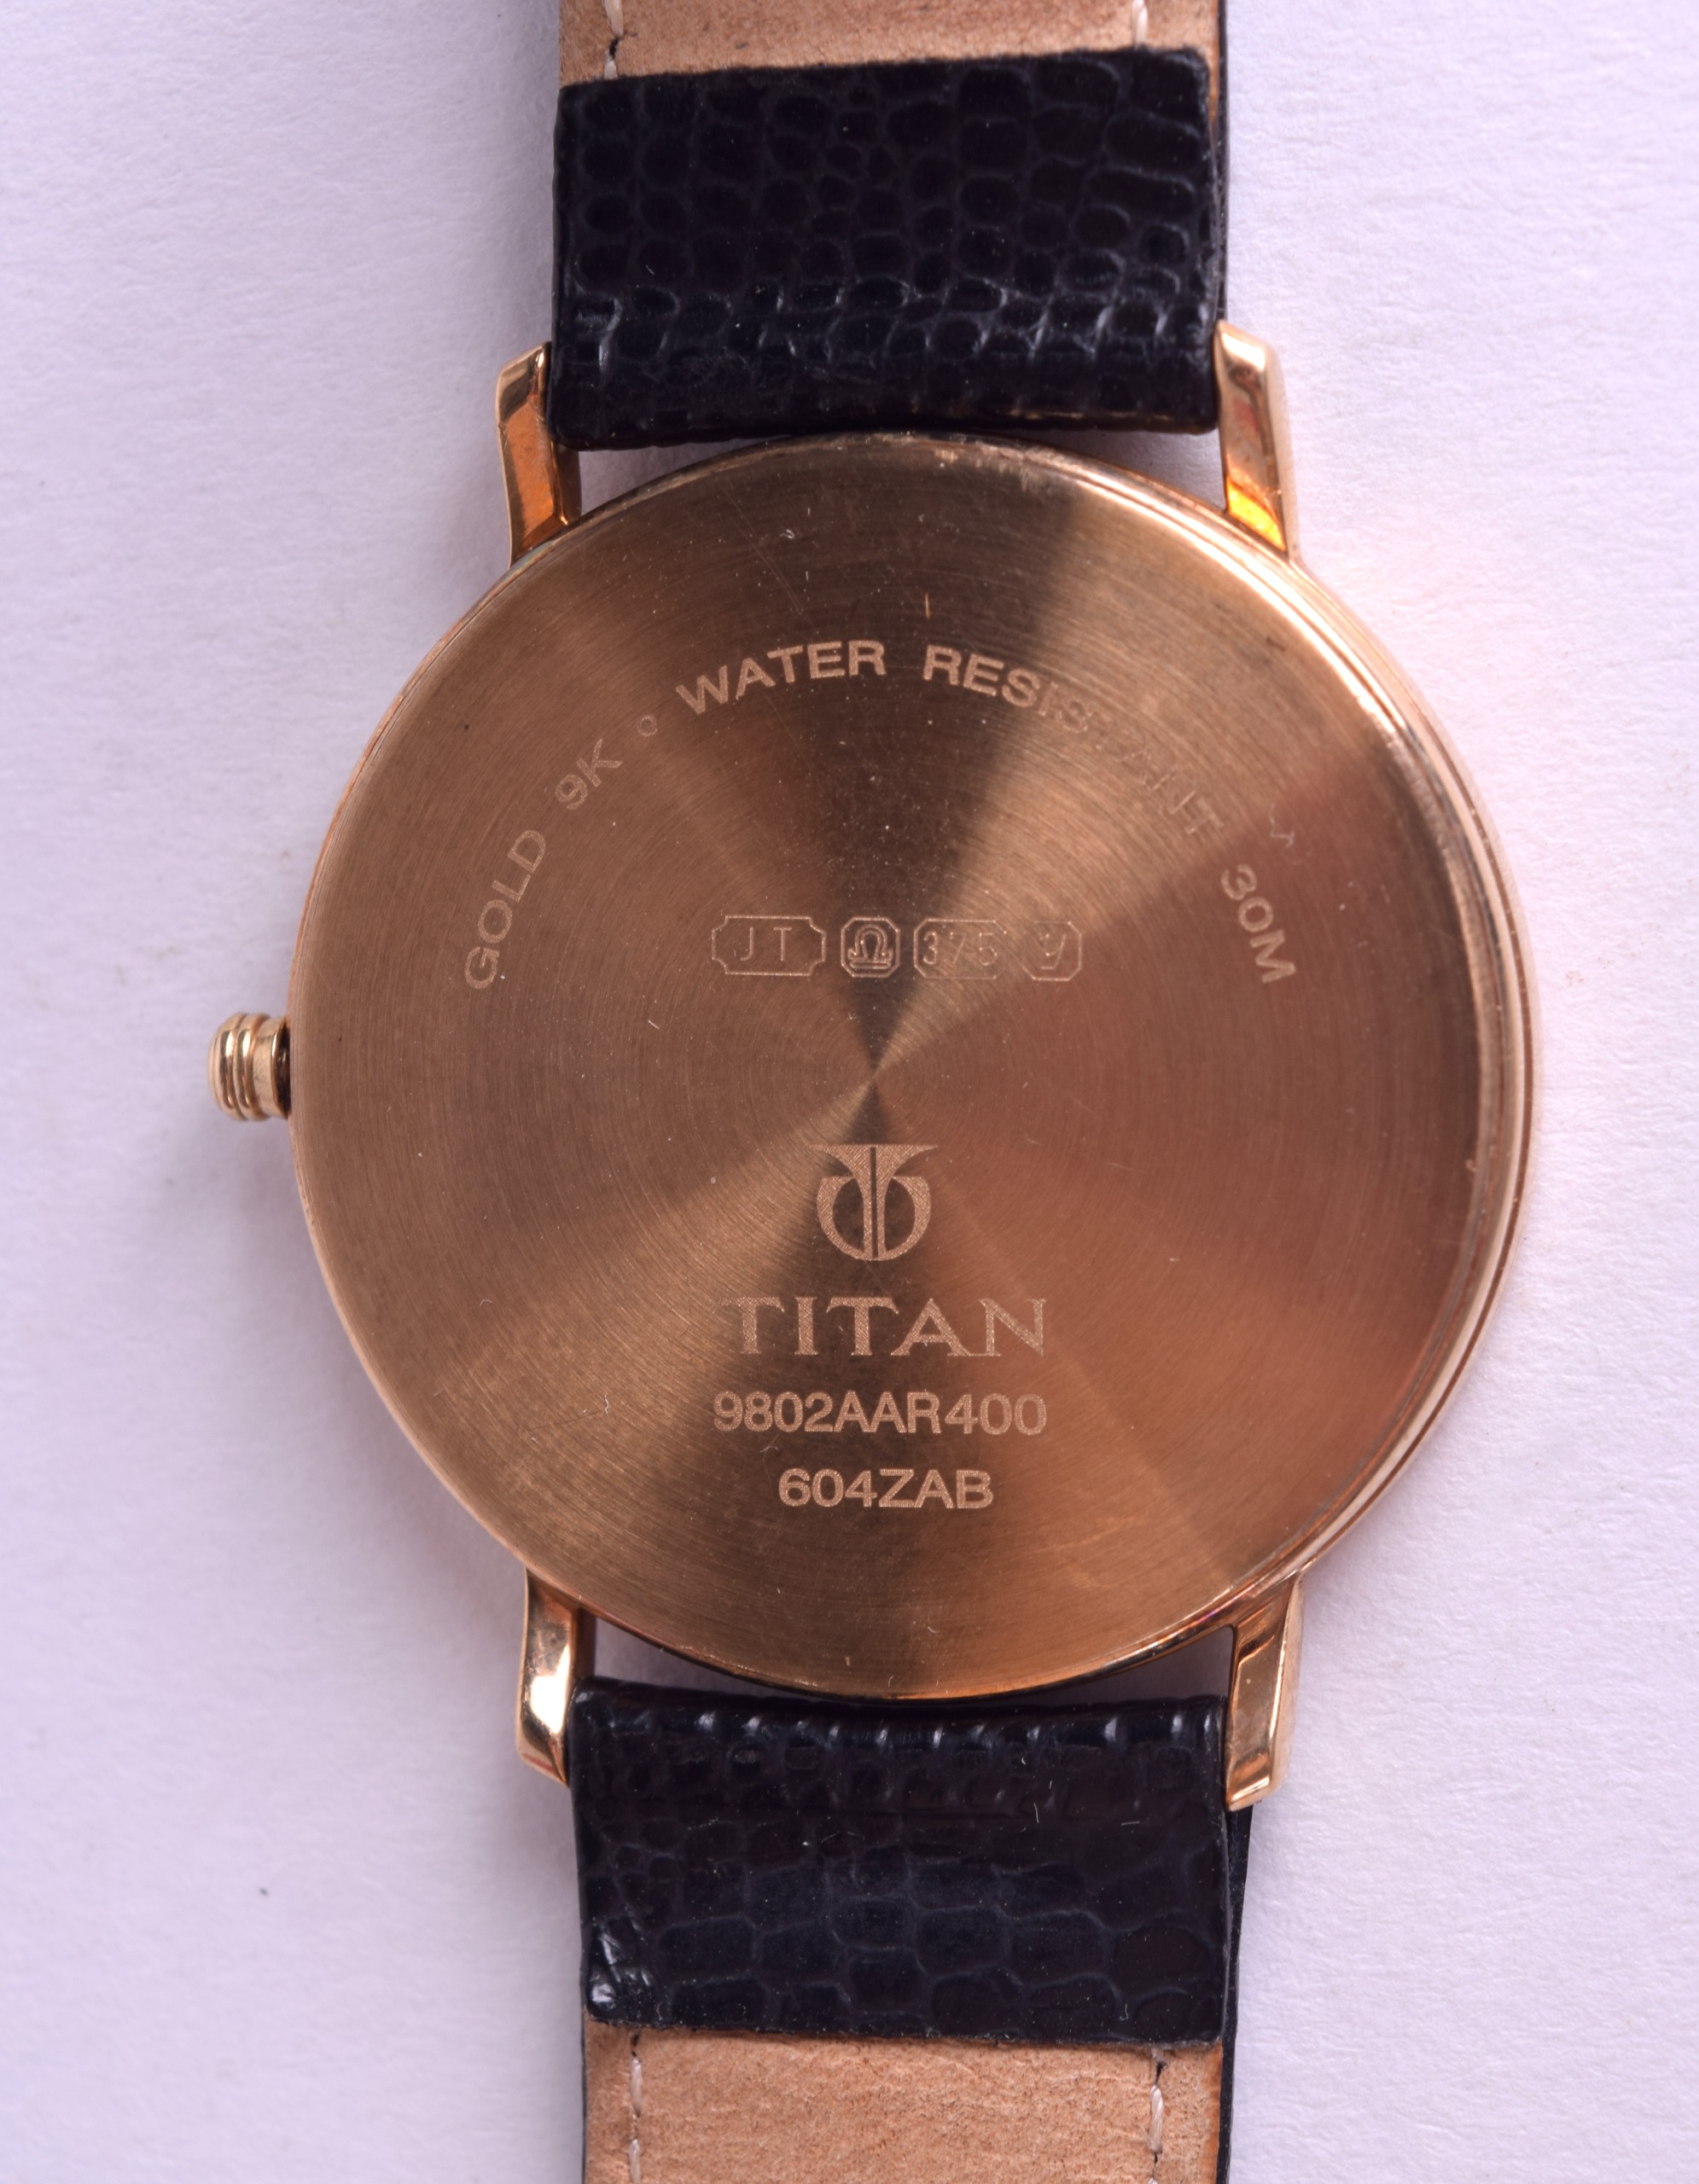 A 9CT TITAN GENTLEMANS WRISTWATCH with white face and gilt numerals. 3 cm diameter. - Image 2 of 5